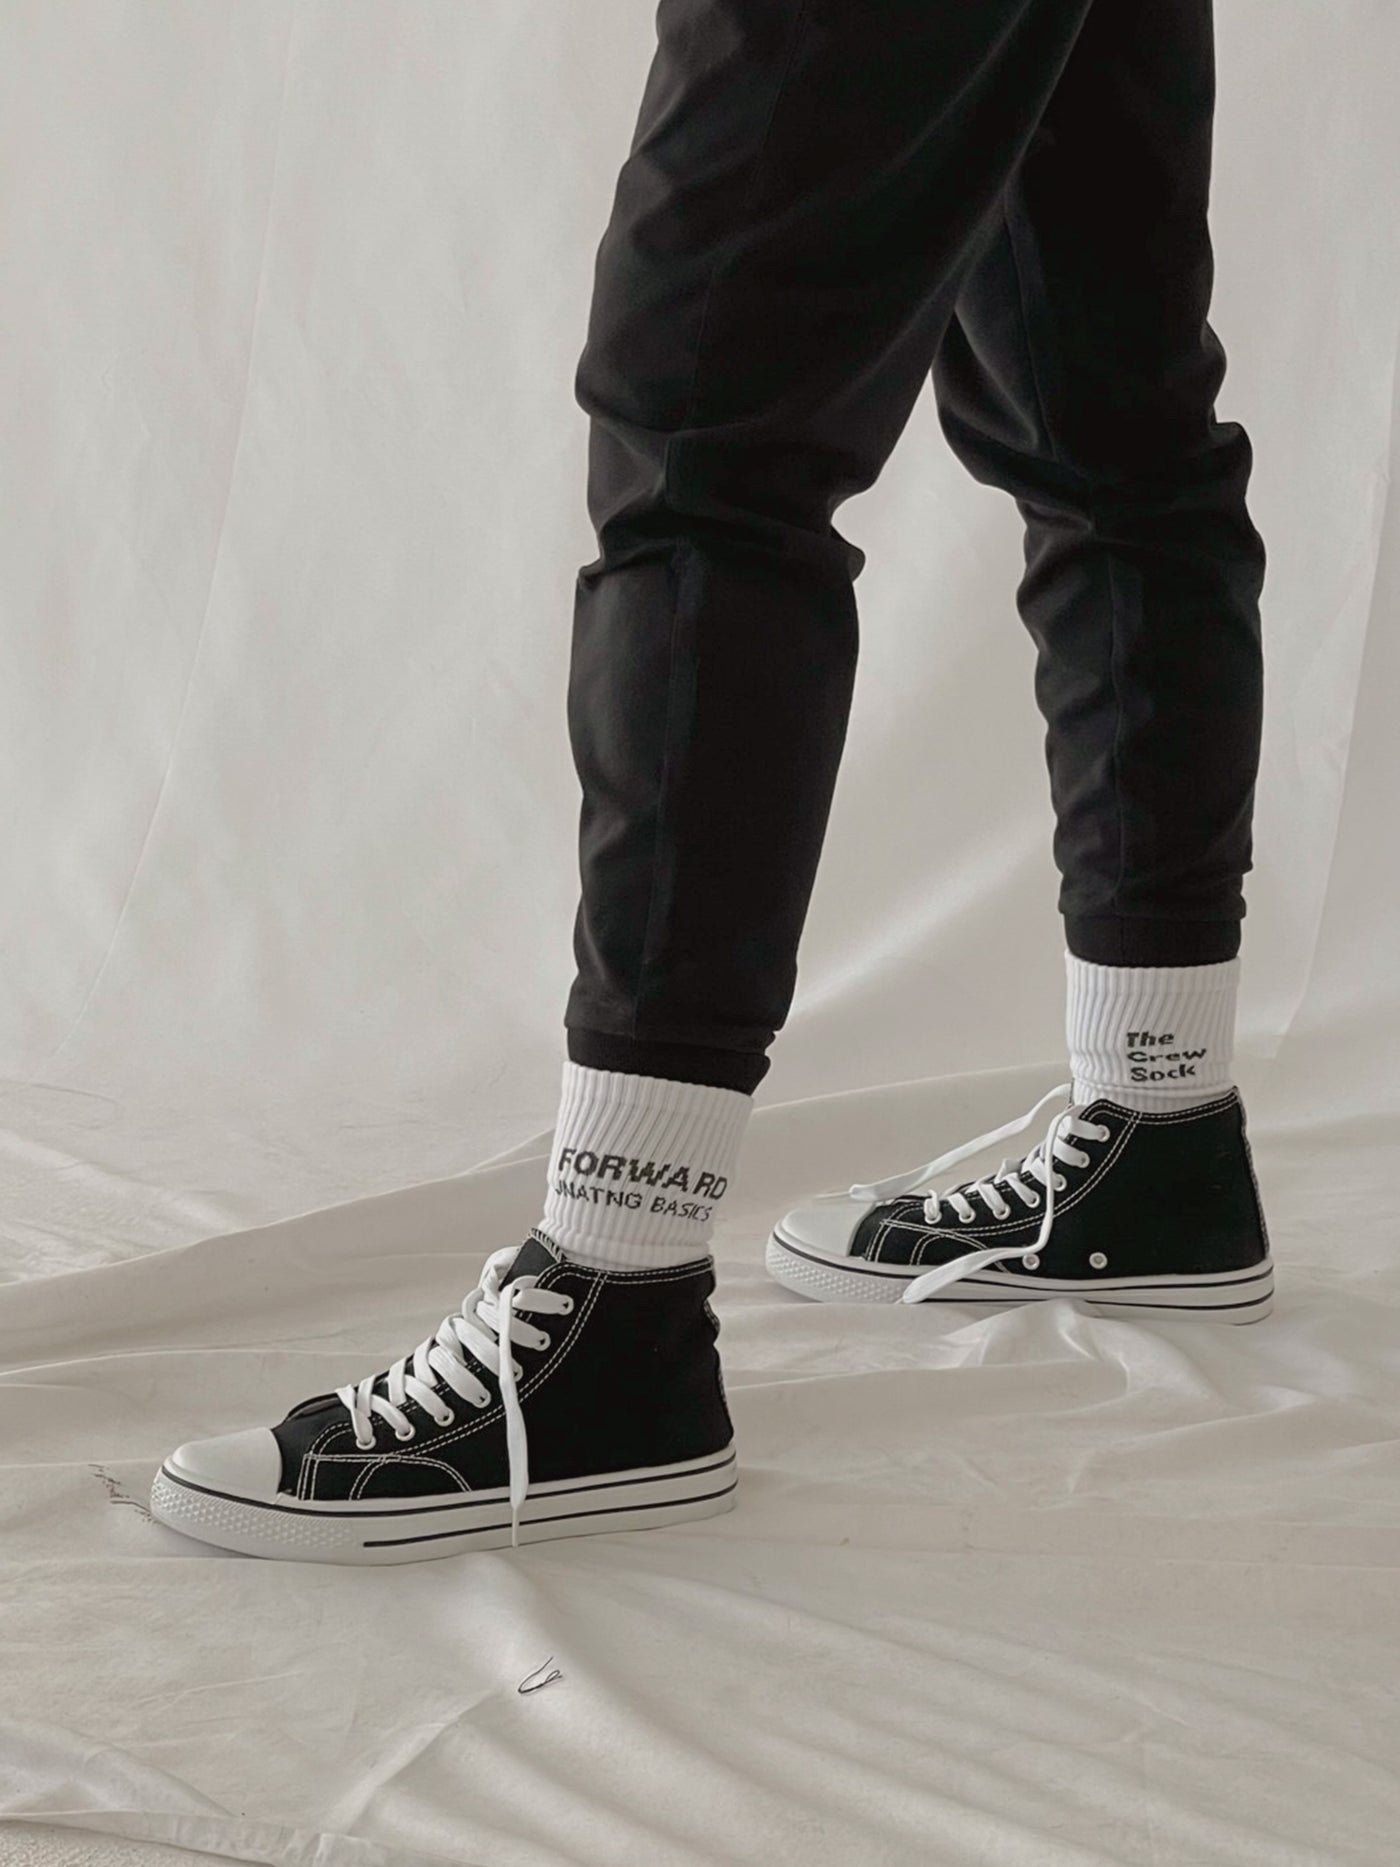 white crew socks with woven logo and black jogger